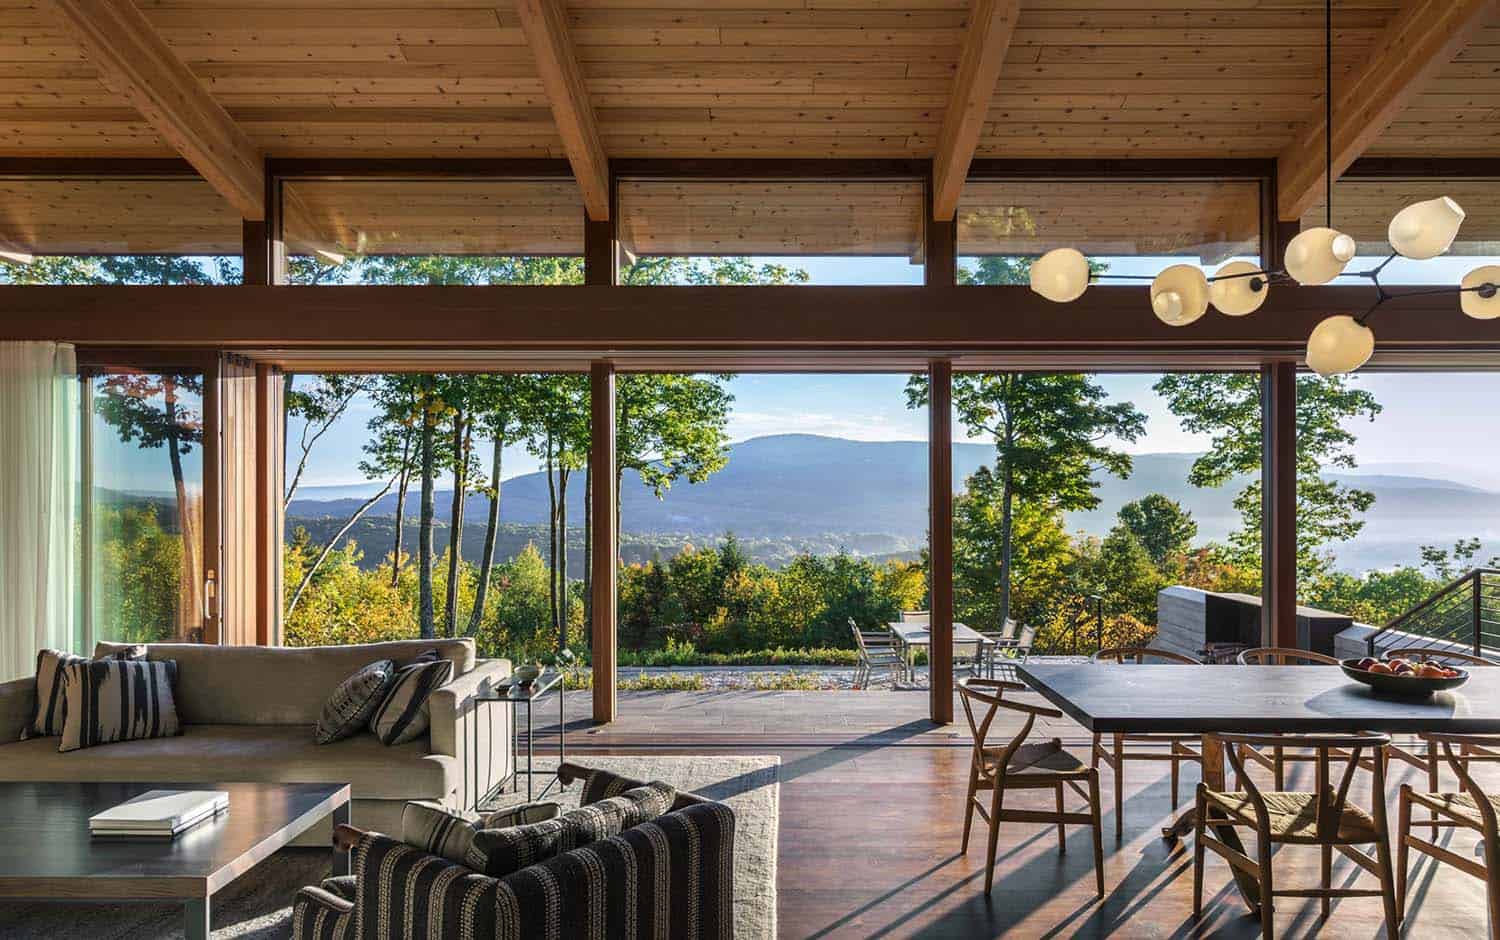 Mountainside home offers sweeping views over the The Berkshires